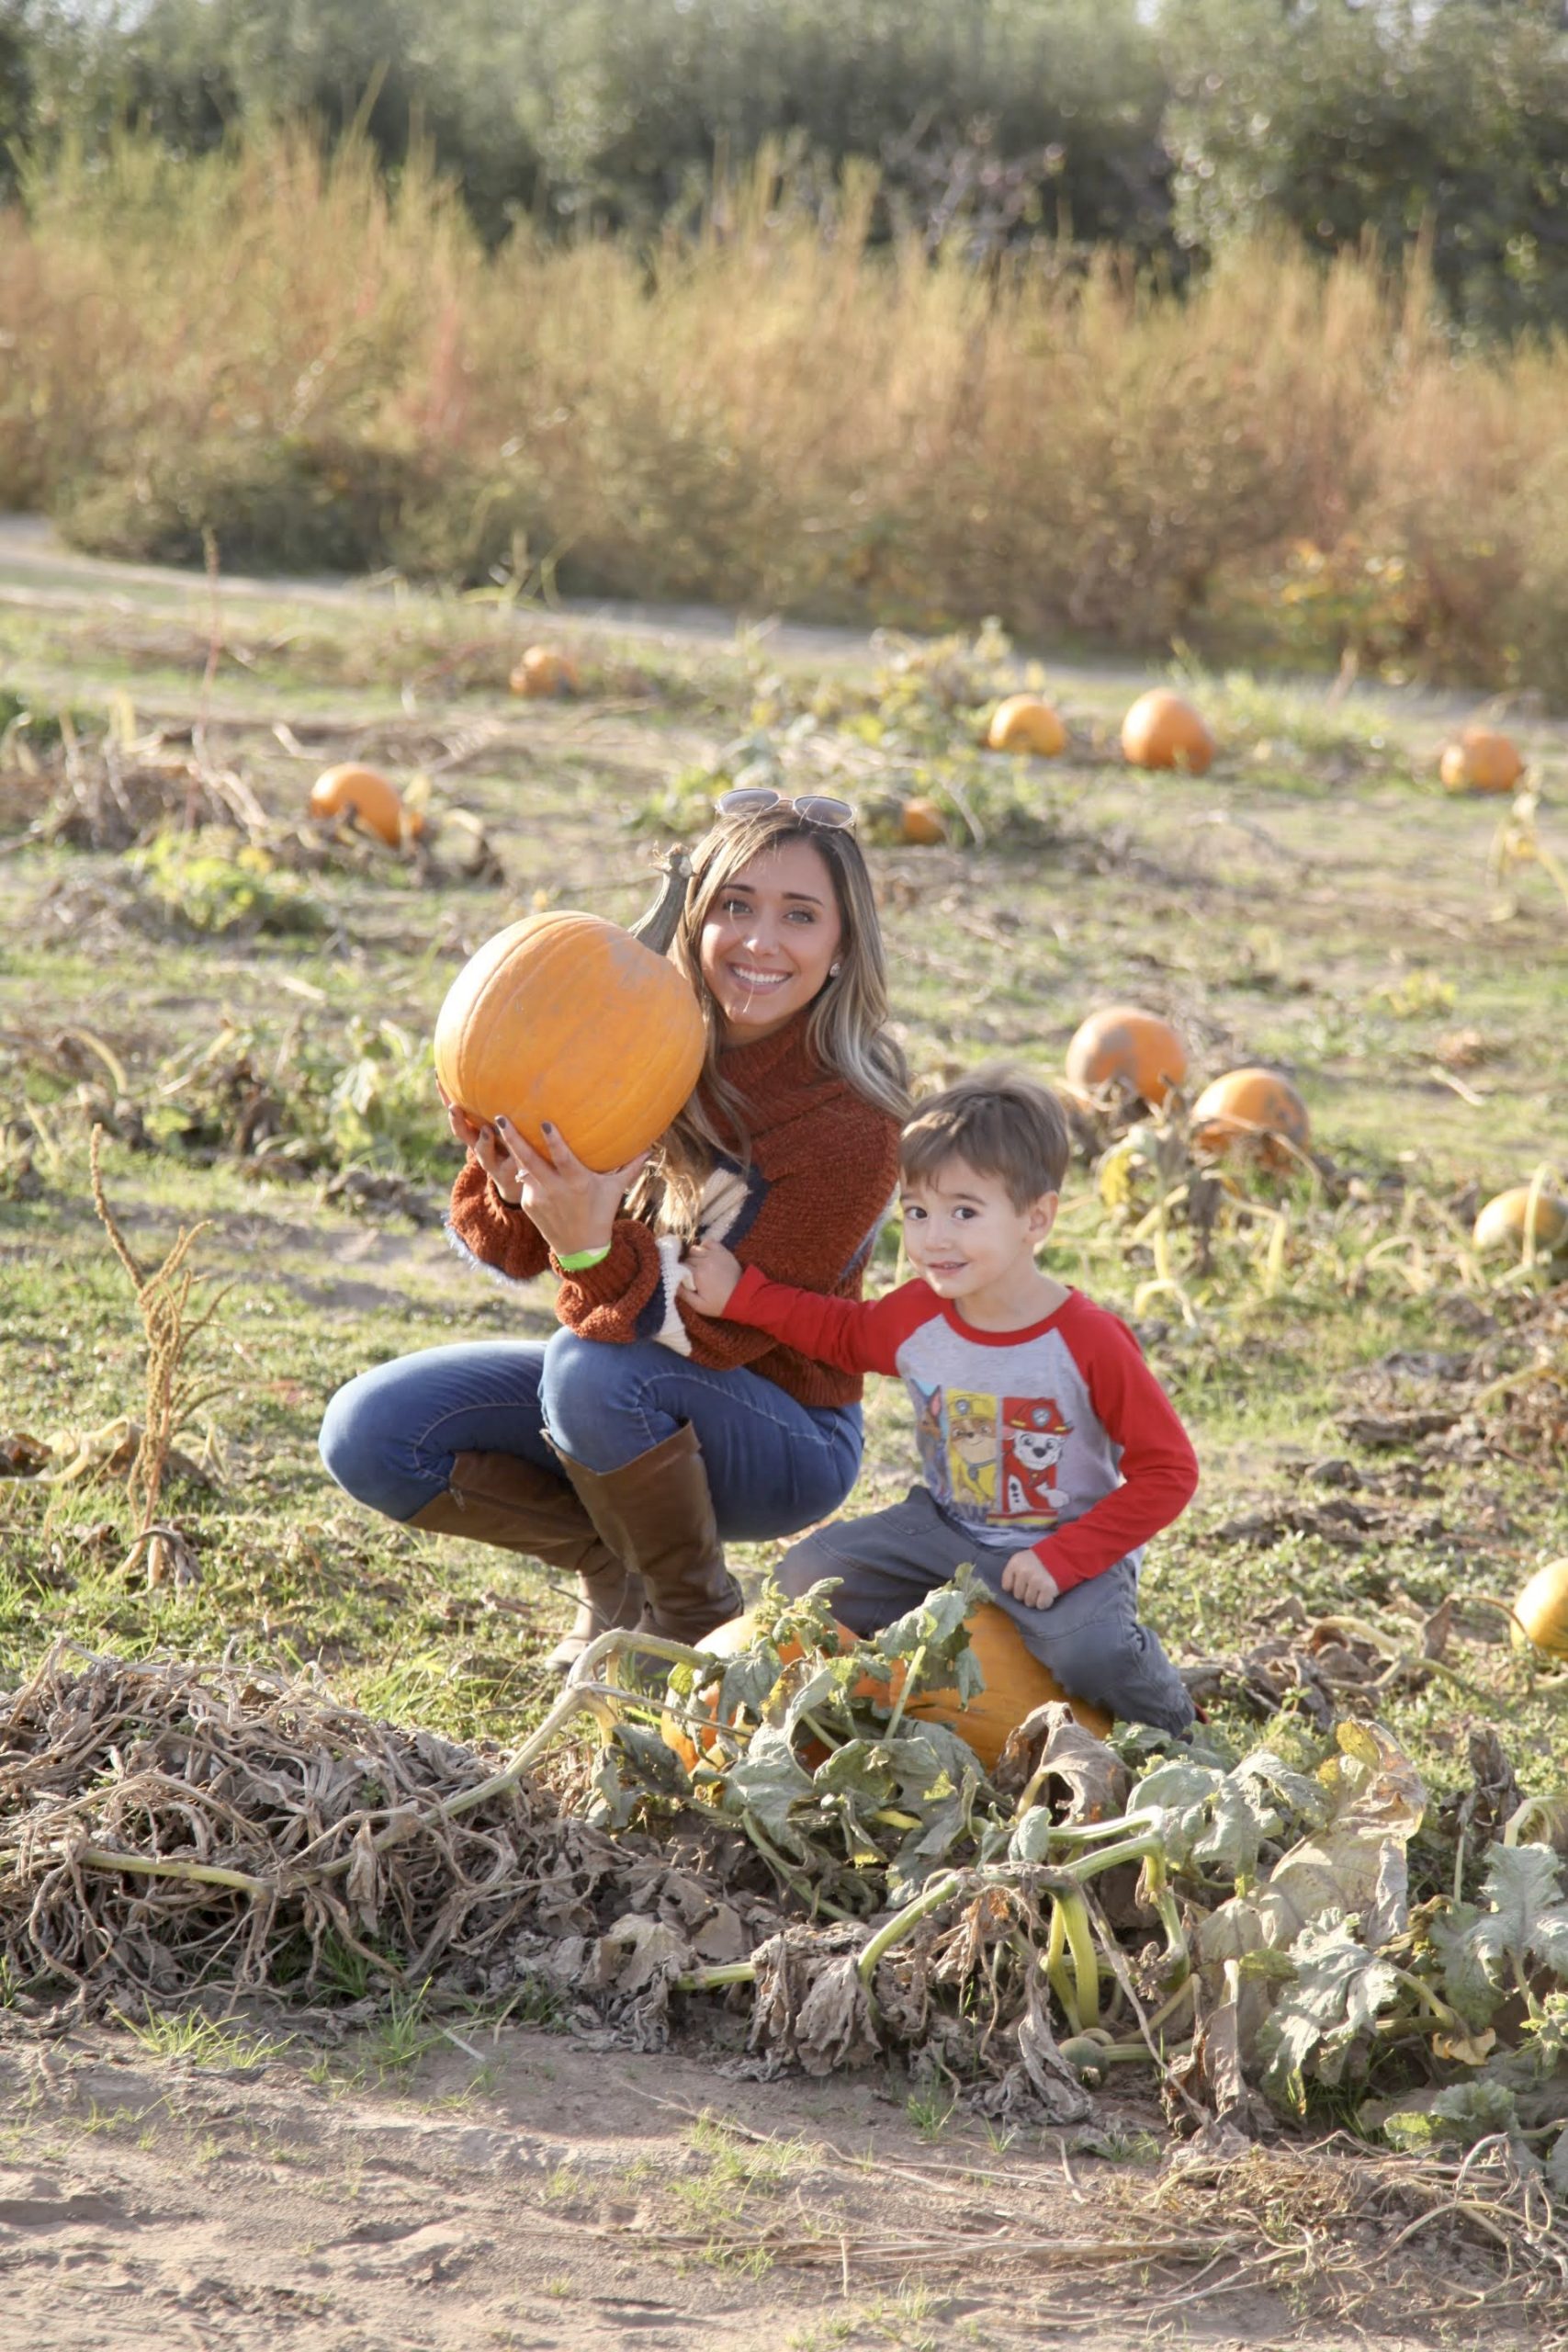 5 Reasons to visit Livesay Orchards Pumpkin Patch and Everything you need to know